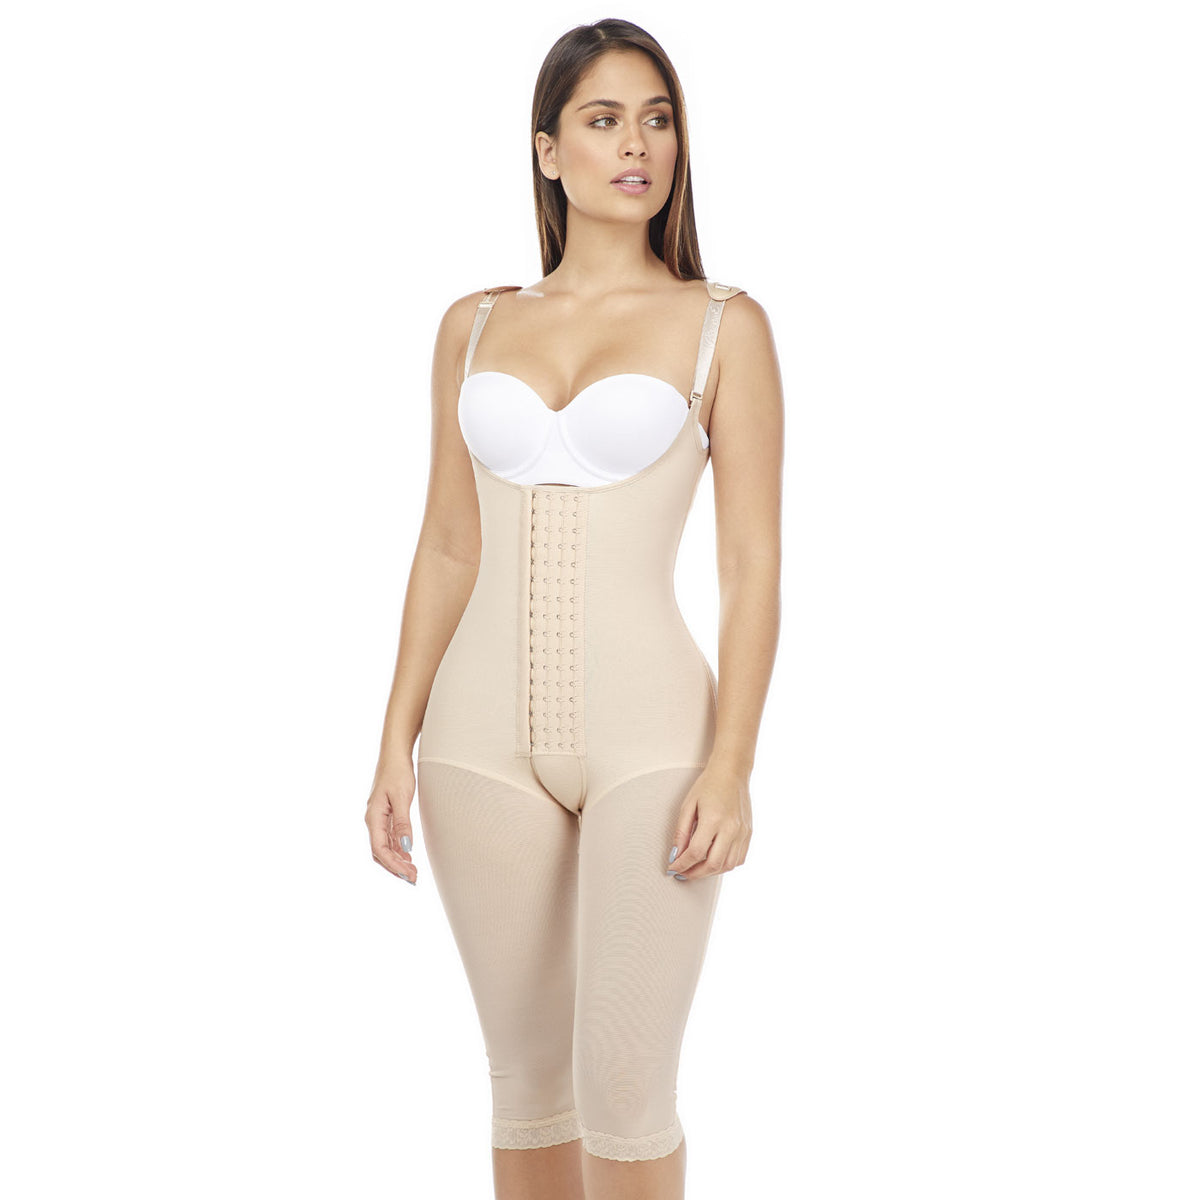 Should I wear Post-Surgical Girdles after a Liposuction or Tummy Tuck? –  Shapes Secrets Fajas